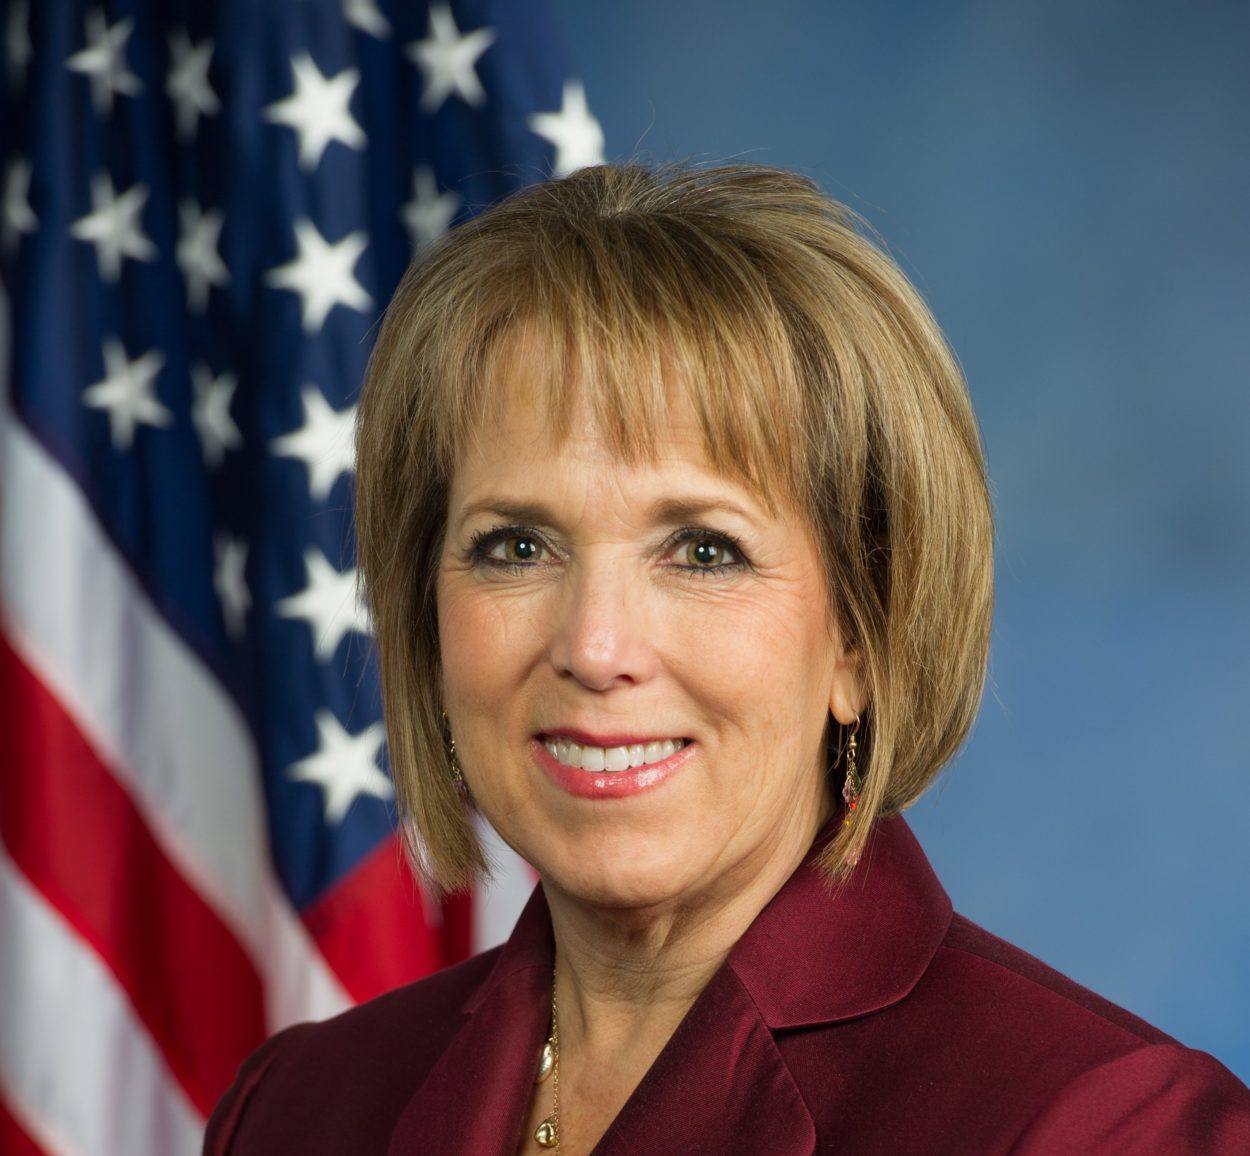 Lujan Grisham won’t appeal education lawsuit if she is next governor